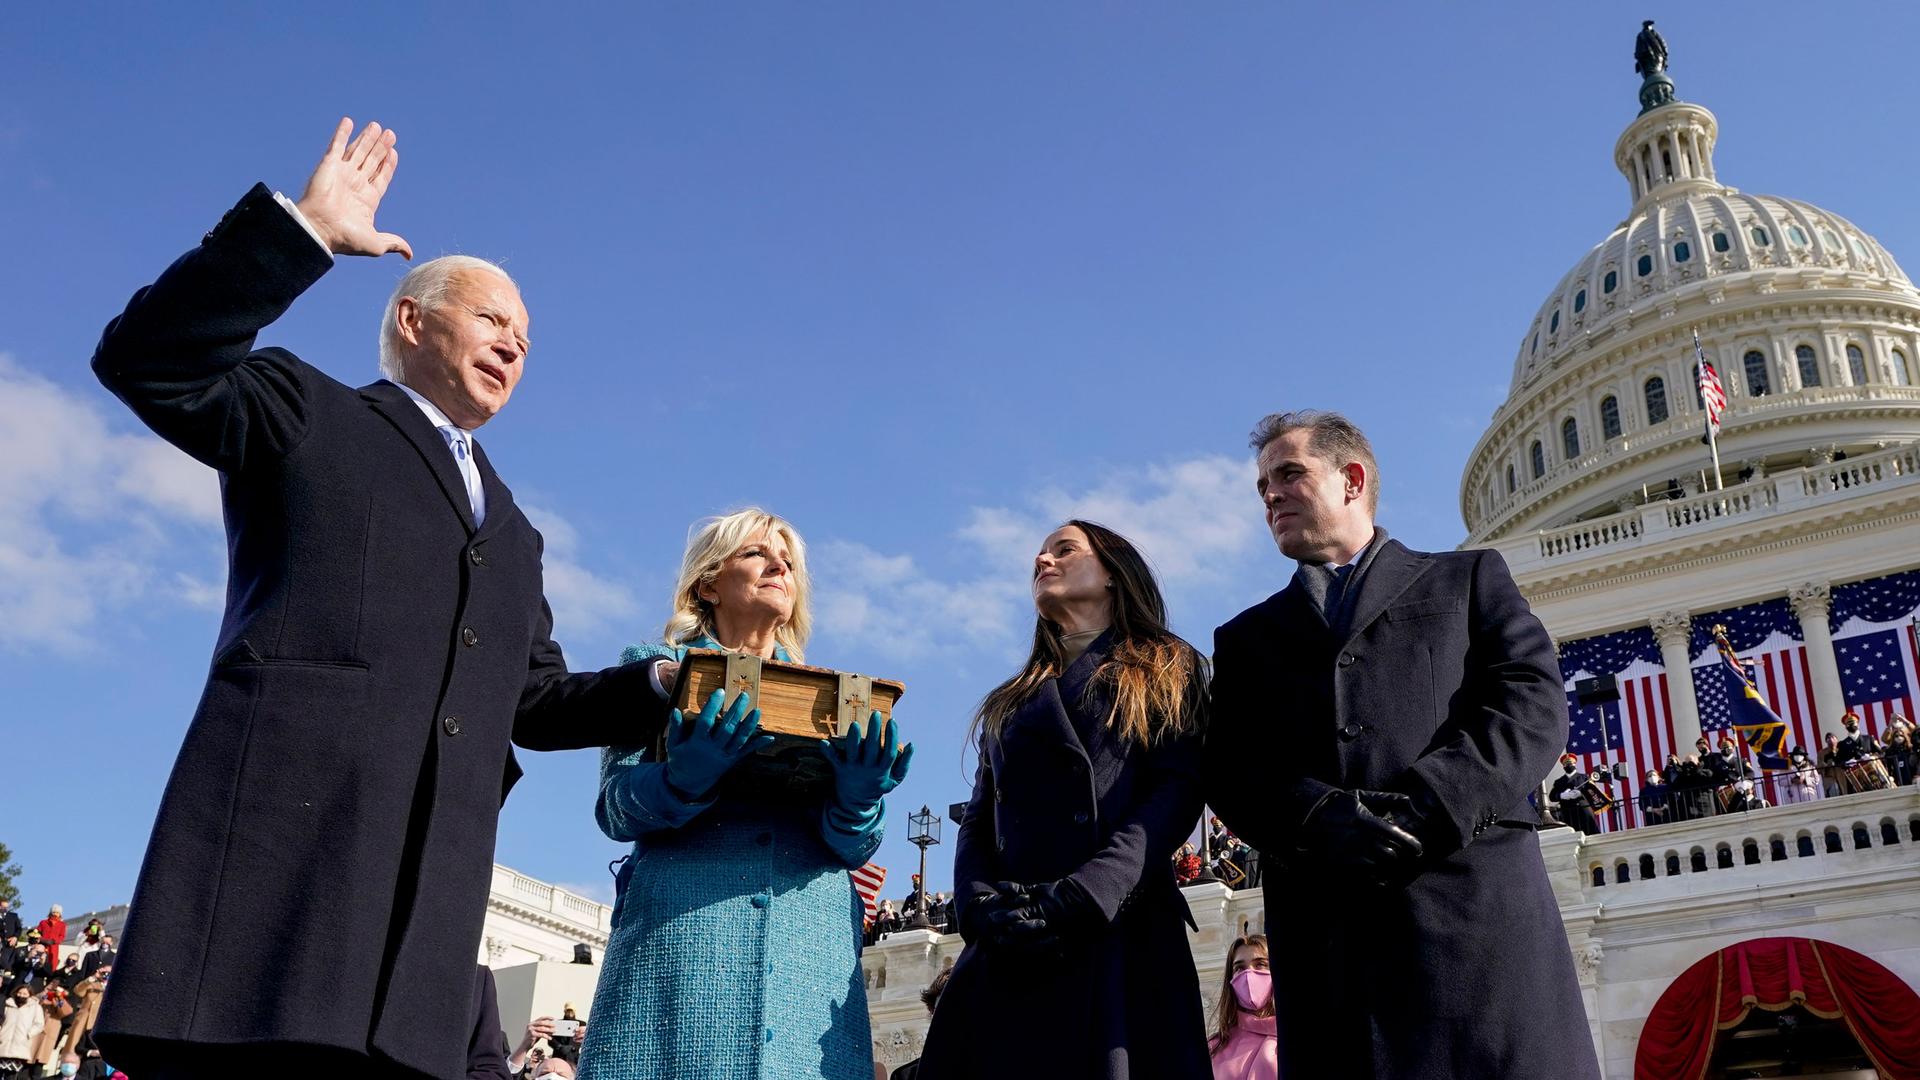 Joe Biden is shown with his right hand in the air and his left hand on a bible as he is sworn in as the 46th president of the United States.